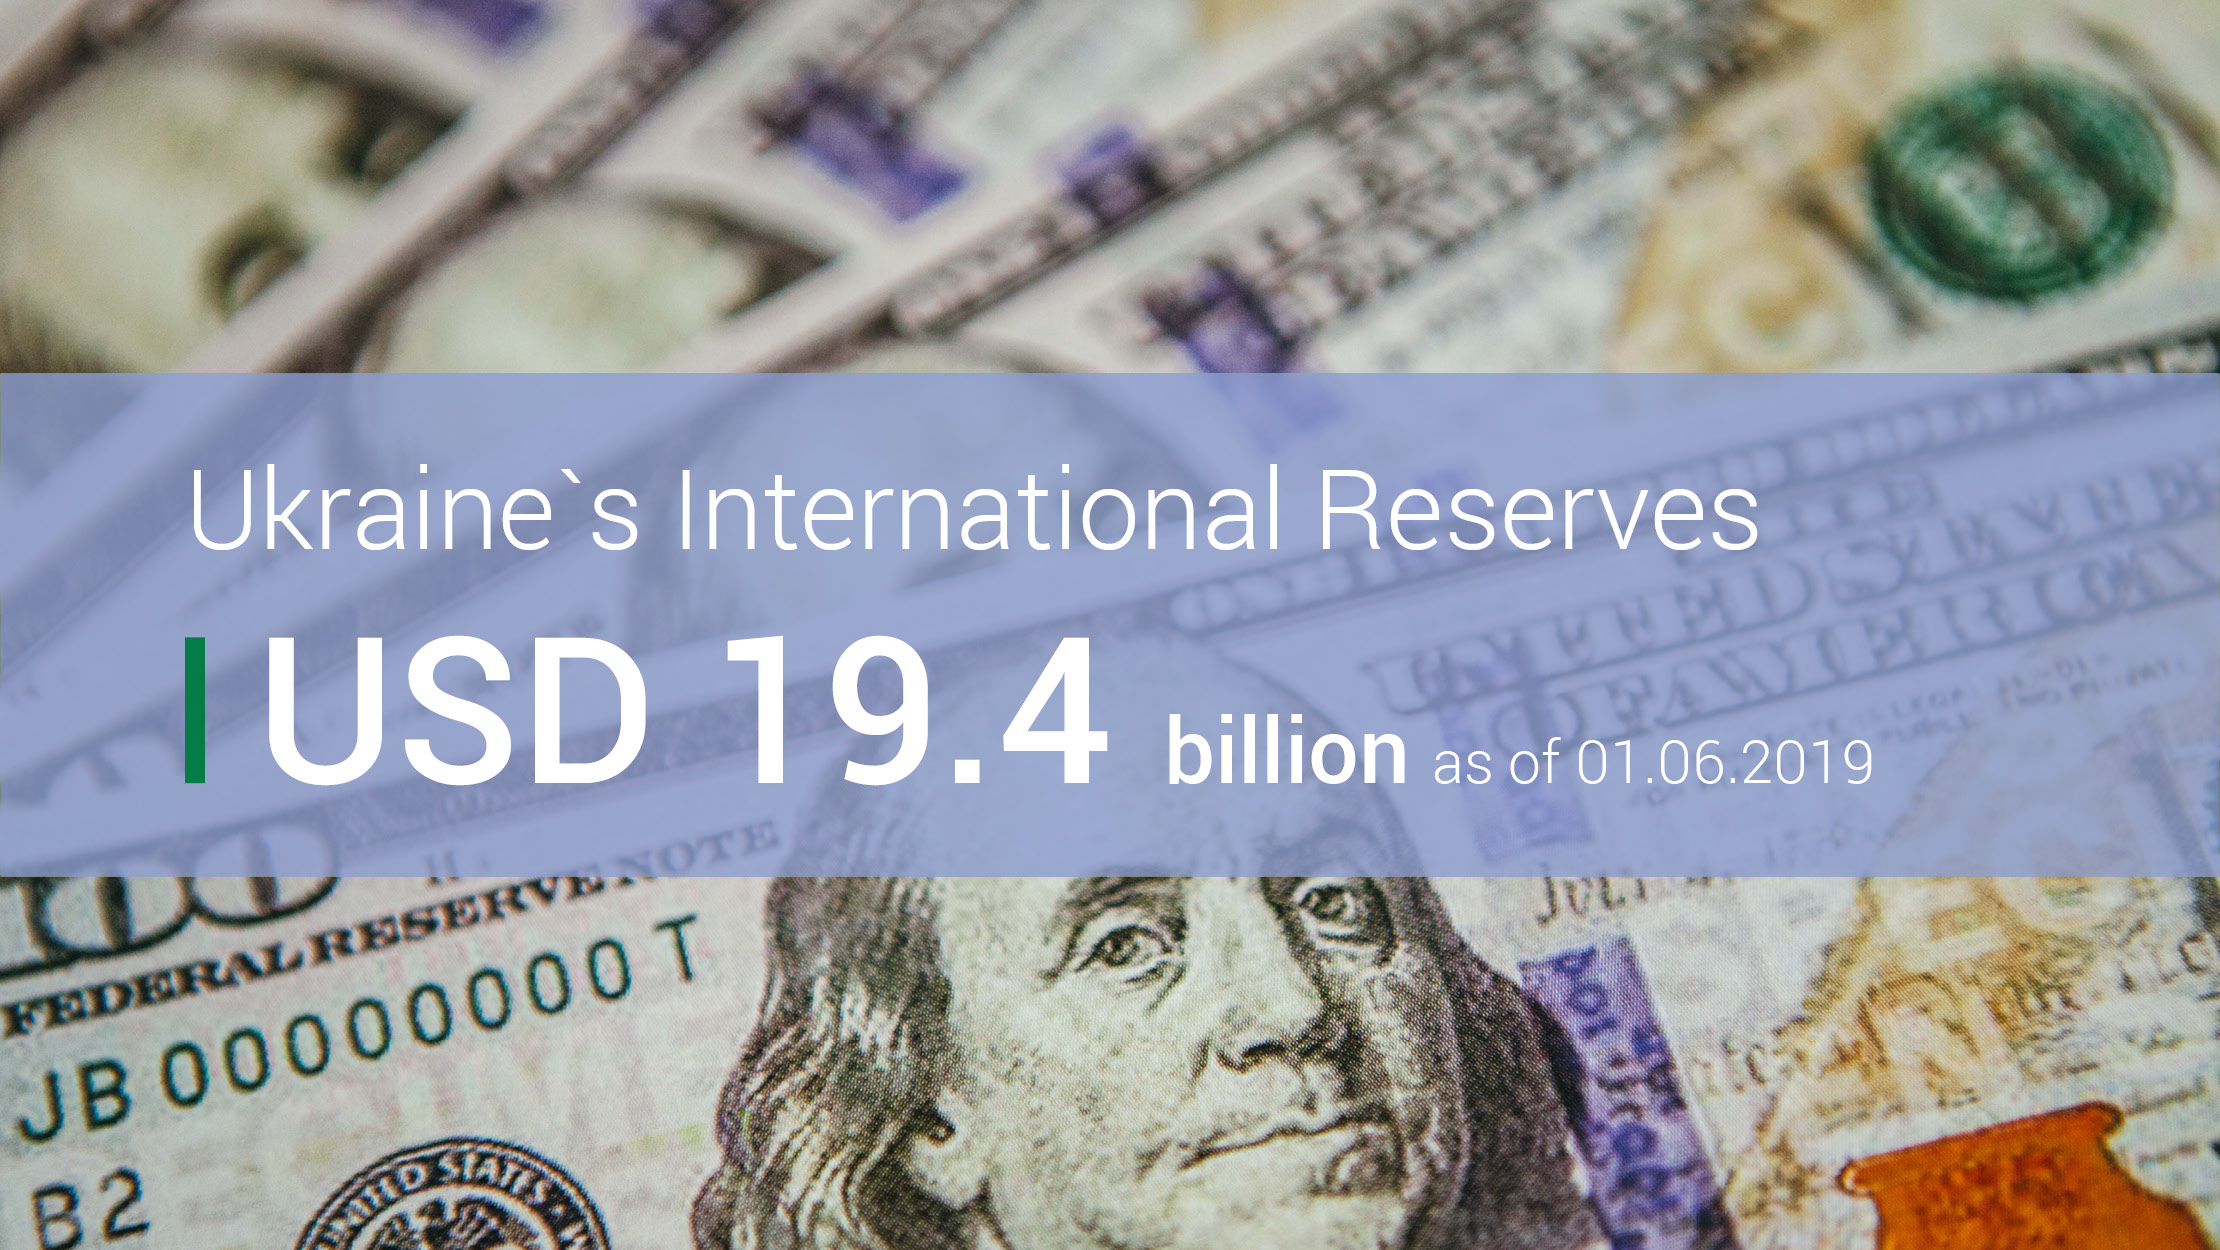 Ukraine’s International Reserves Stand at USD 19.4 billion in May 2019